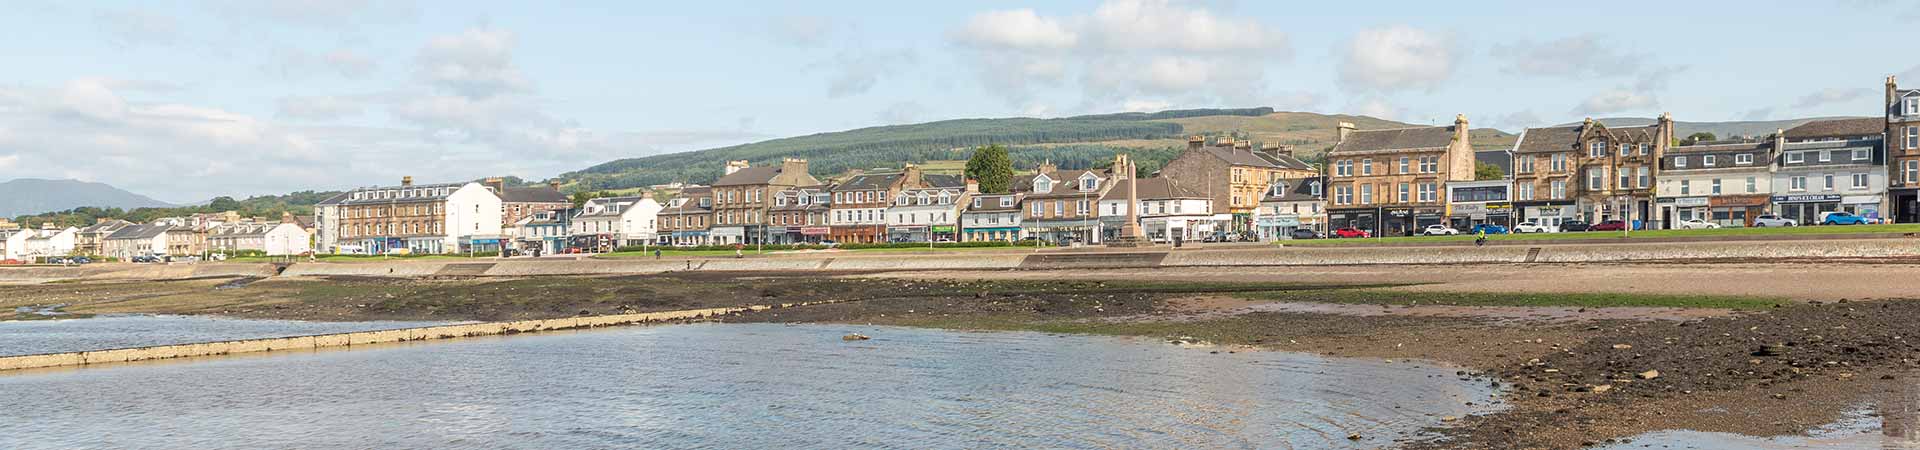 Cottages in Helensburgh